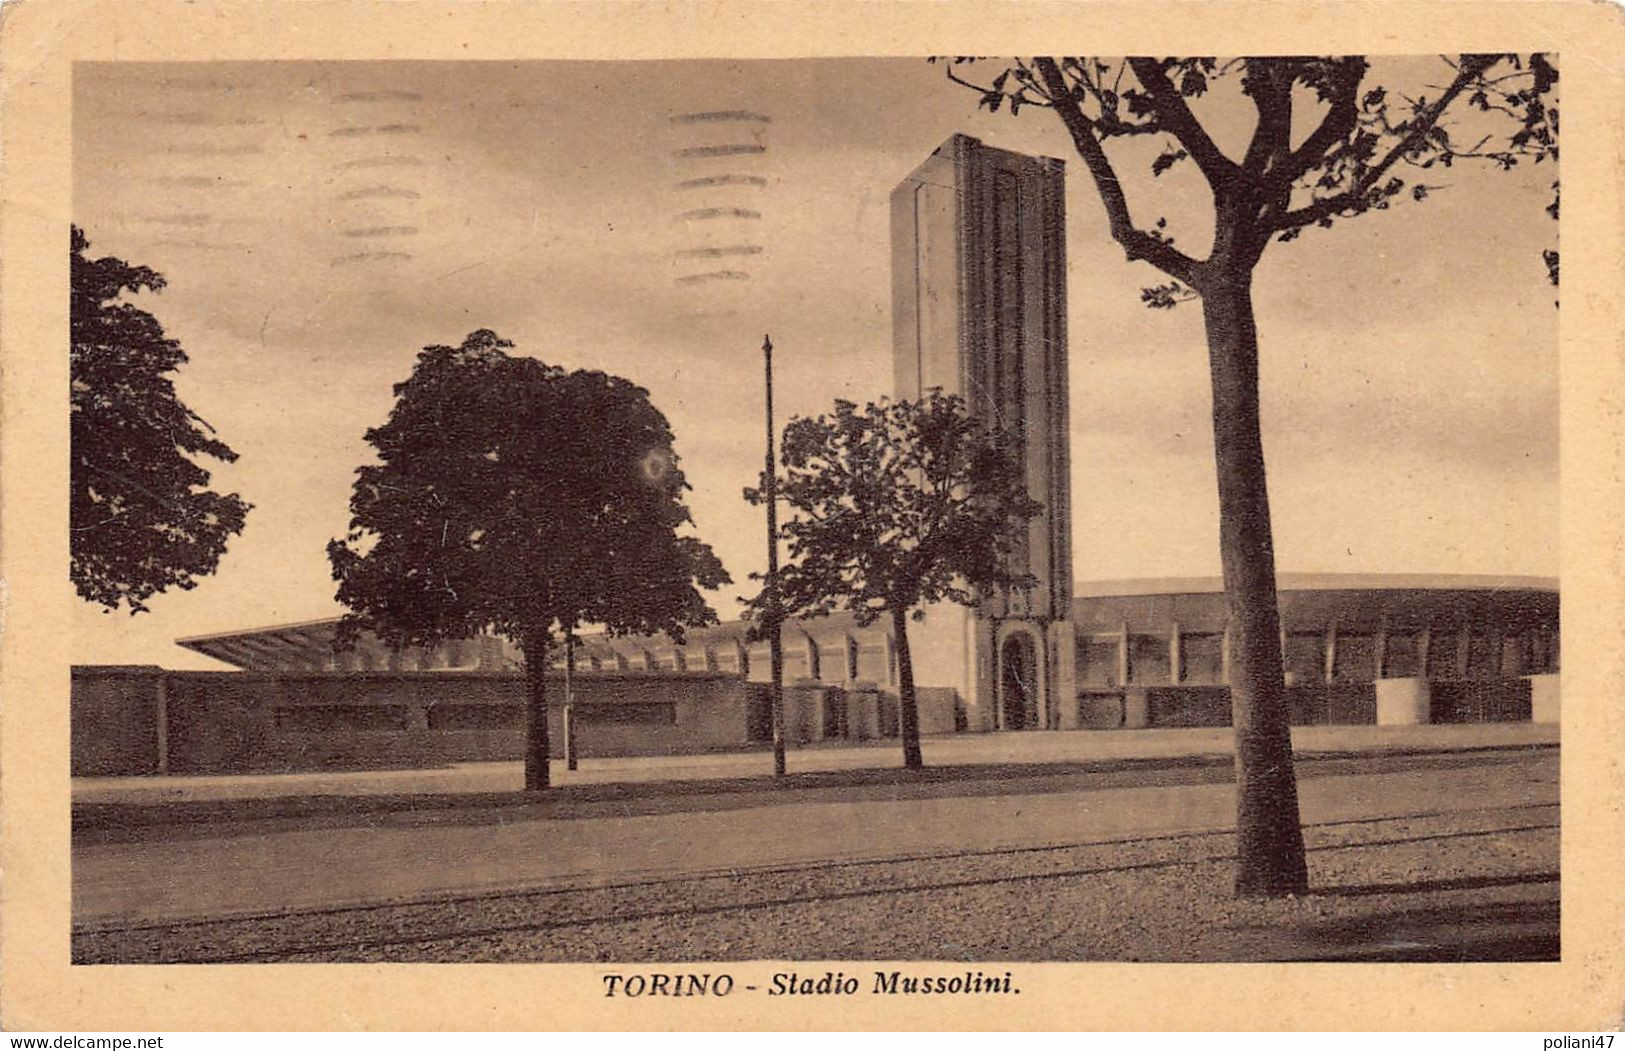 00326 "TORINO - STADIO MUSSOLINI" VEDUTA, ARCHIT. '900. CART SPED 1941 - Stades & Structures Sportives